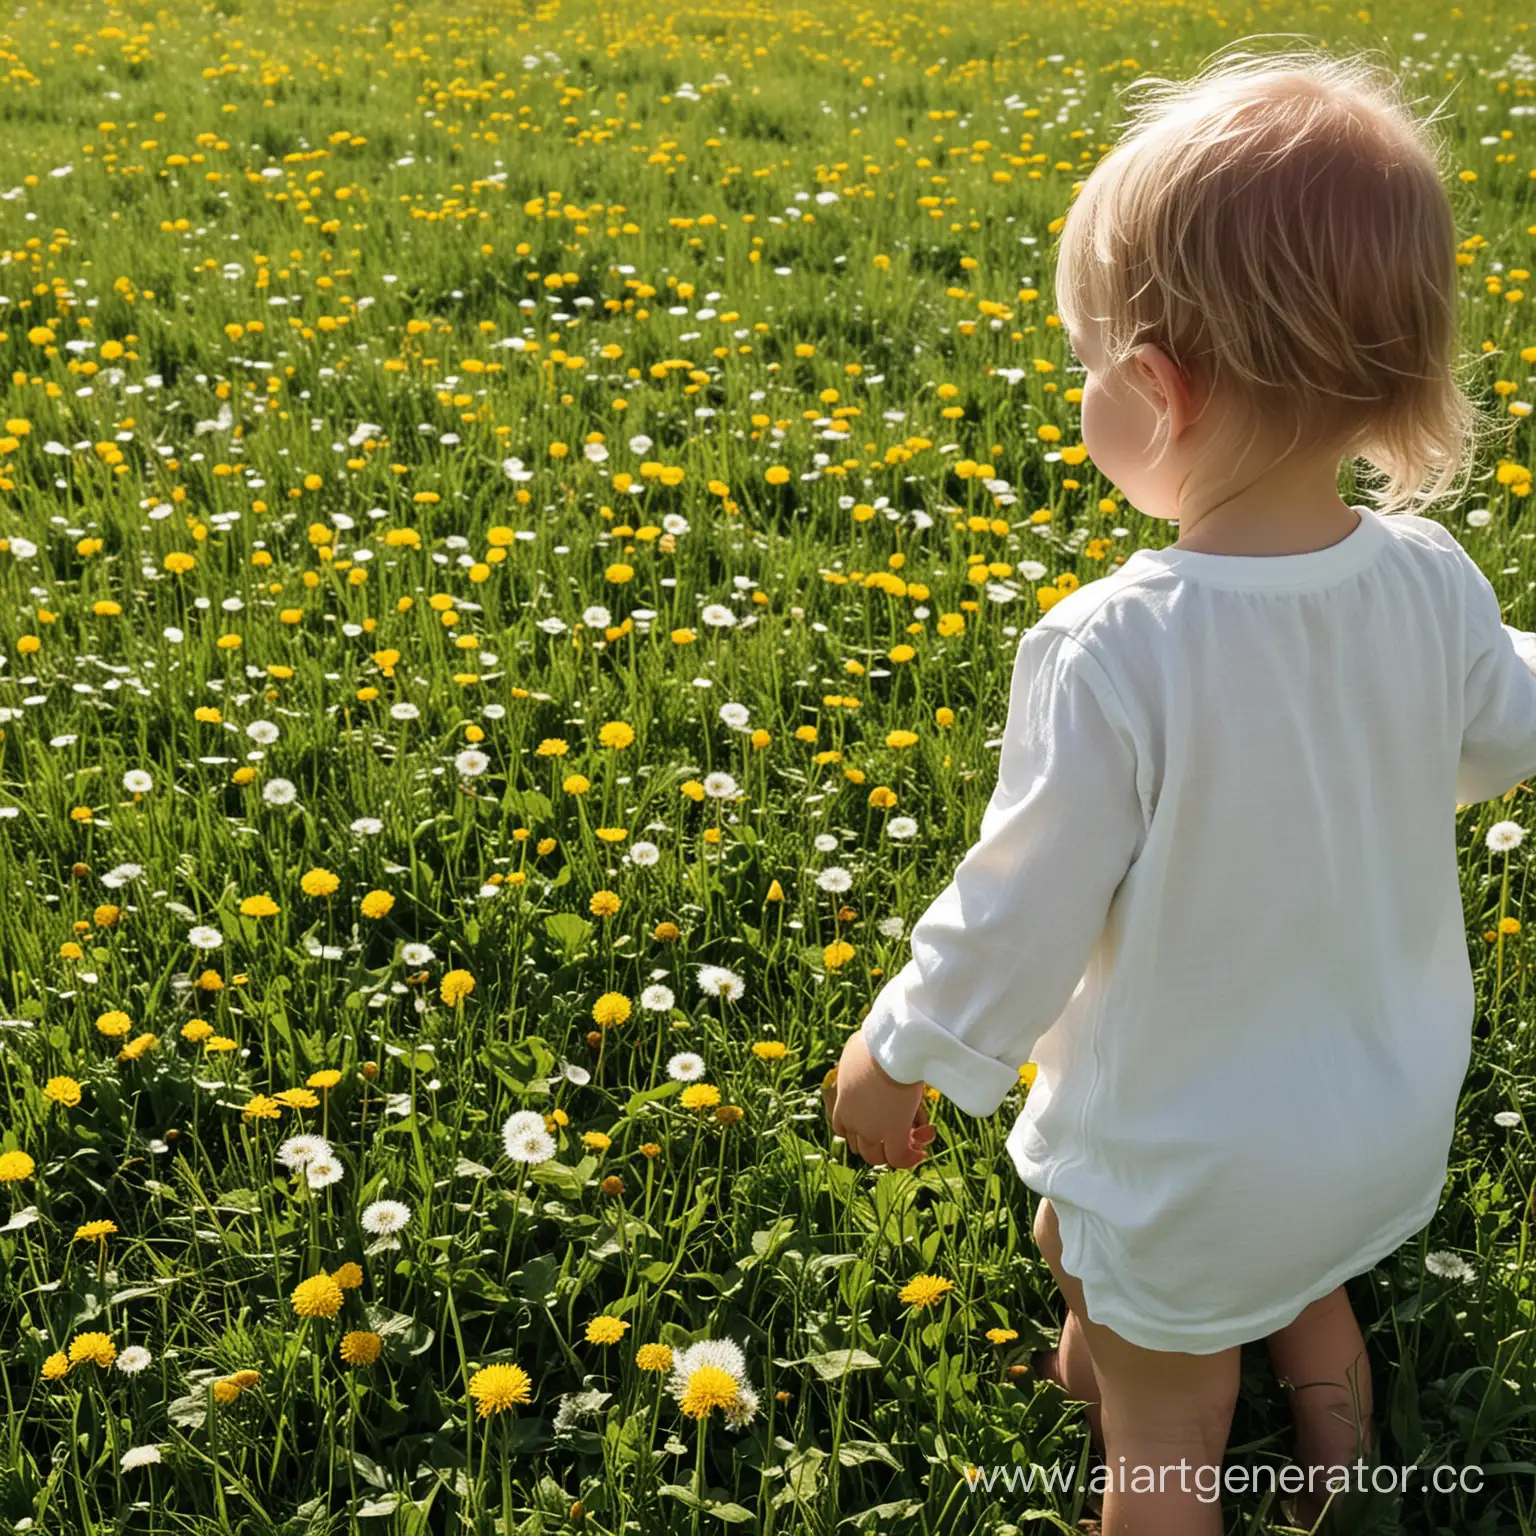 Sunlit-Green-Grass-with-Dandelions-and-Clothing